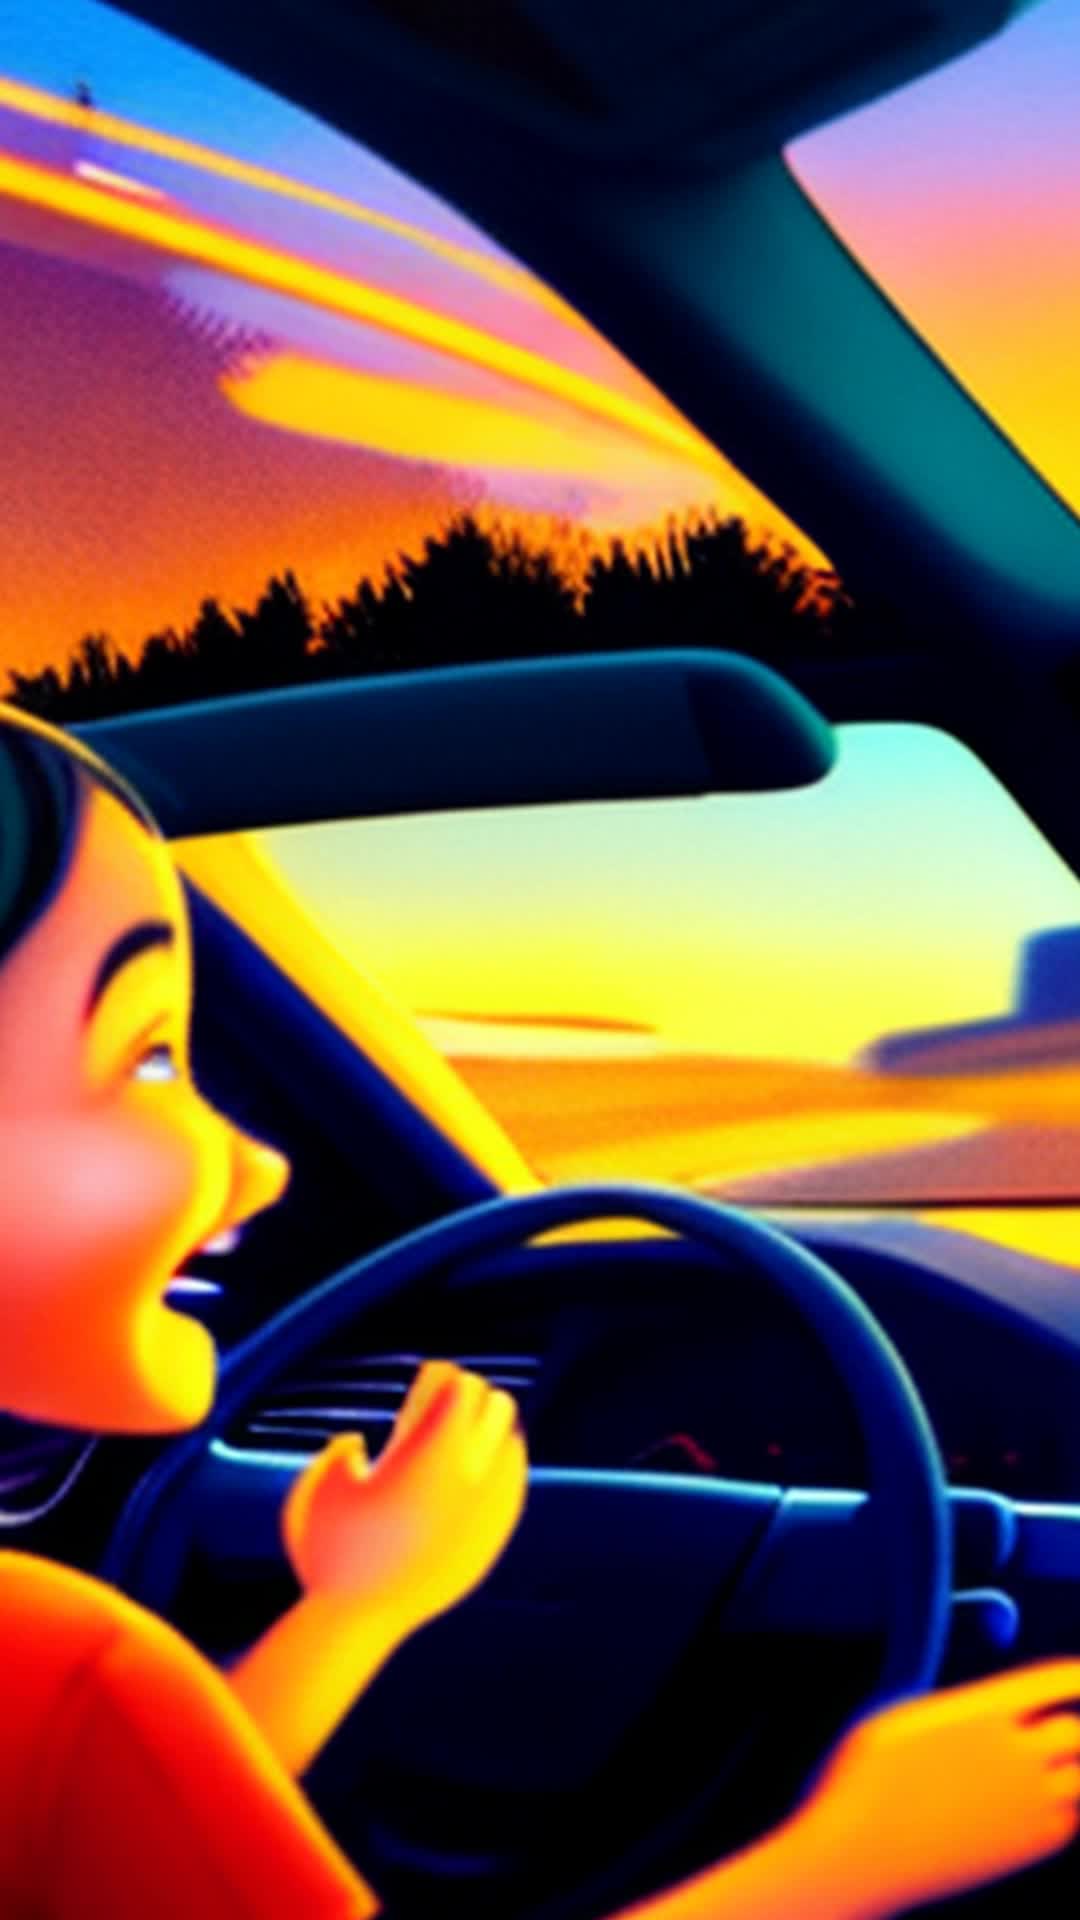 Sunset dipping below horizon, Mike, daughter in car, eyes sparkled with excitement, animatedly sharing favorite book, vibrant colors of sky, soft shadows inside car, detailed expressions, close-up, dashboard glow illuminating faces